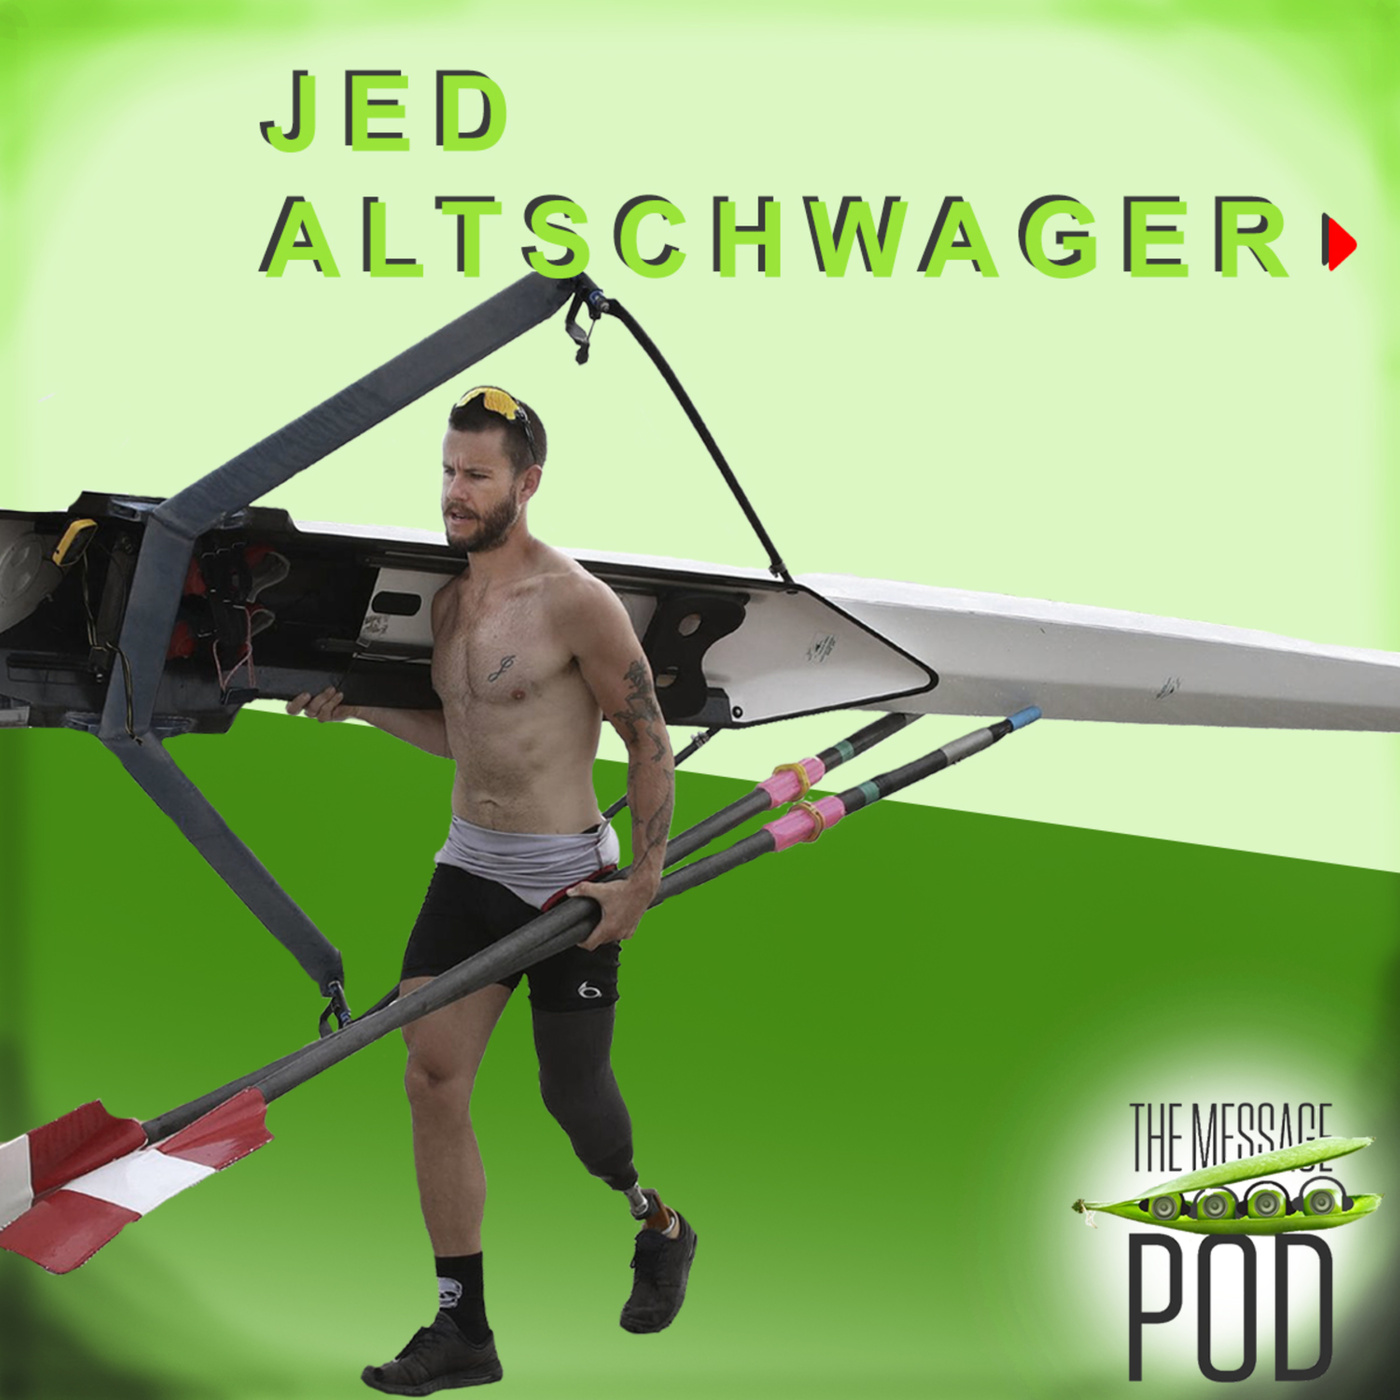 #63 Jed Altschwager - on building inspiration from adversity